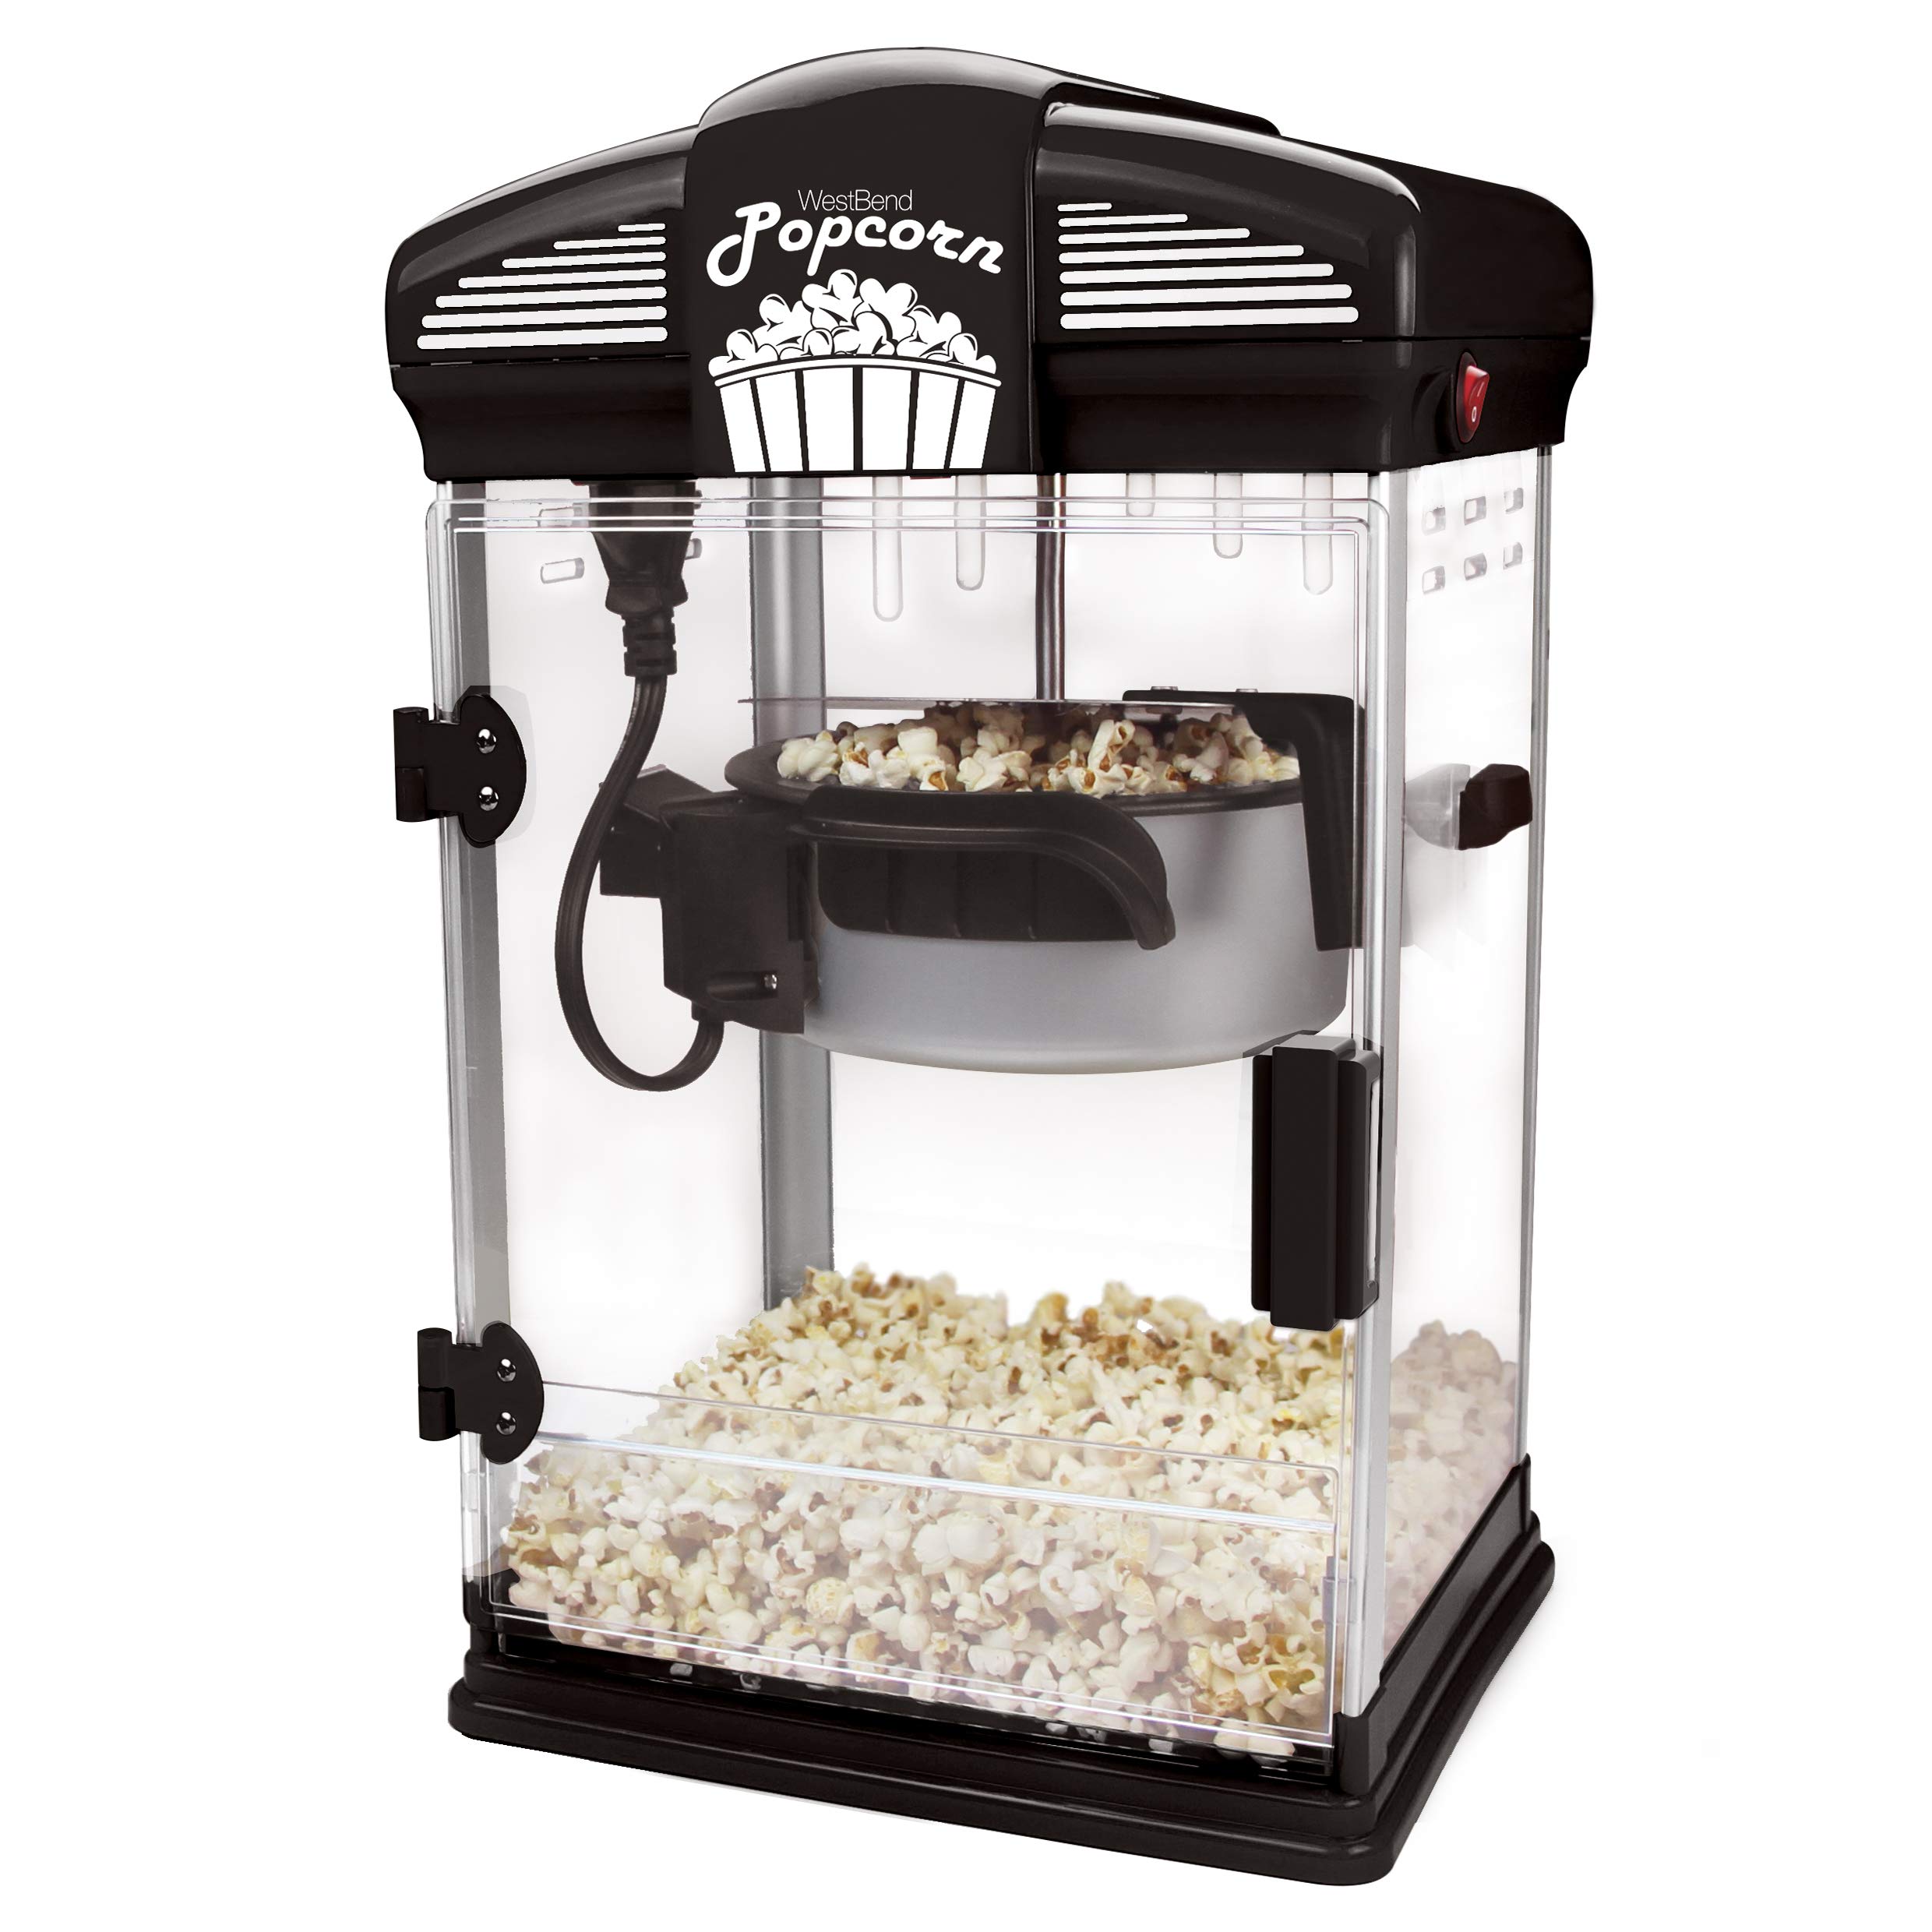 West Bend 82515B Machine with Nonstick Kettle Includes Measuring Cup Scoop Hot Oil Movie Theater Style Popcorn Popper, 4-Quart